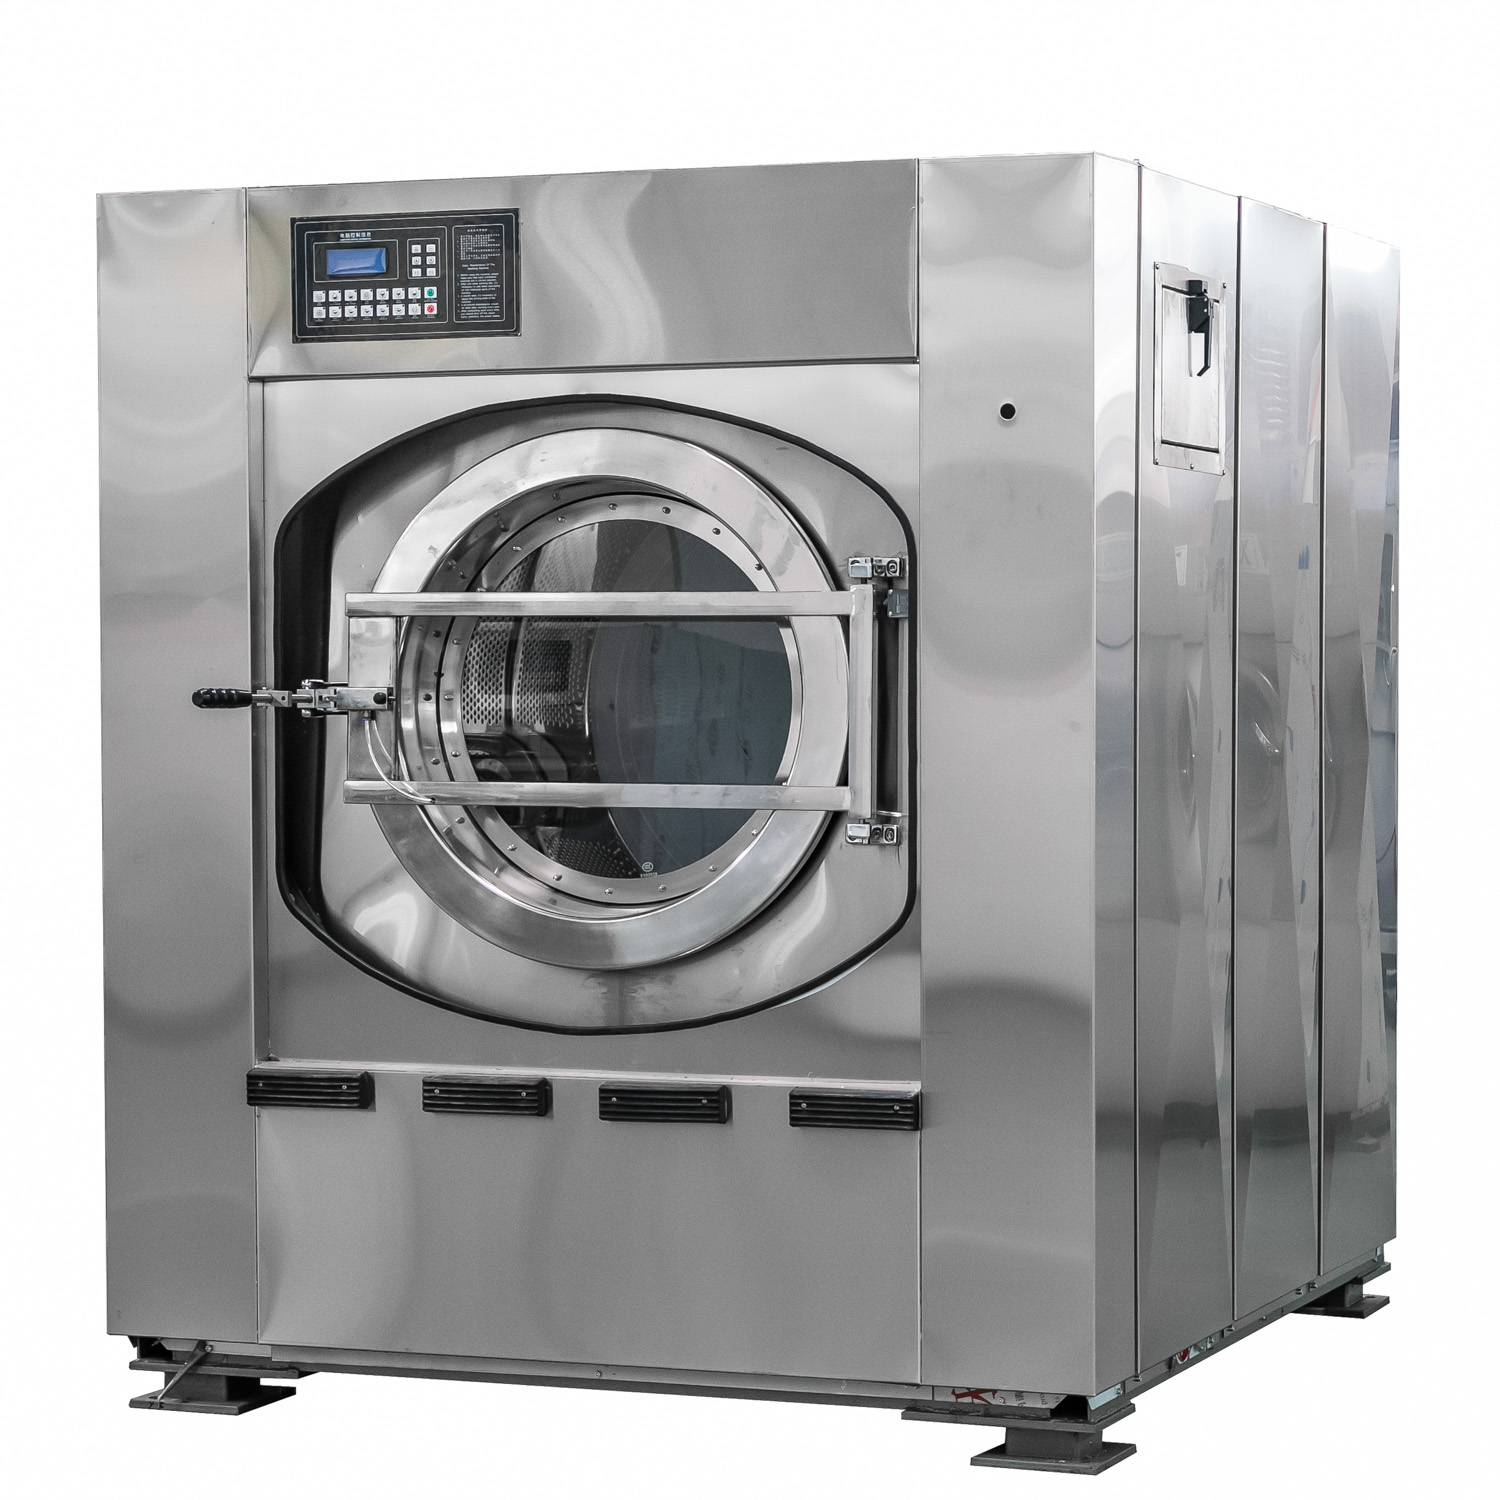 What is a washer extractor?